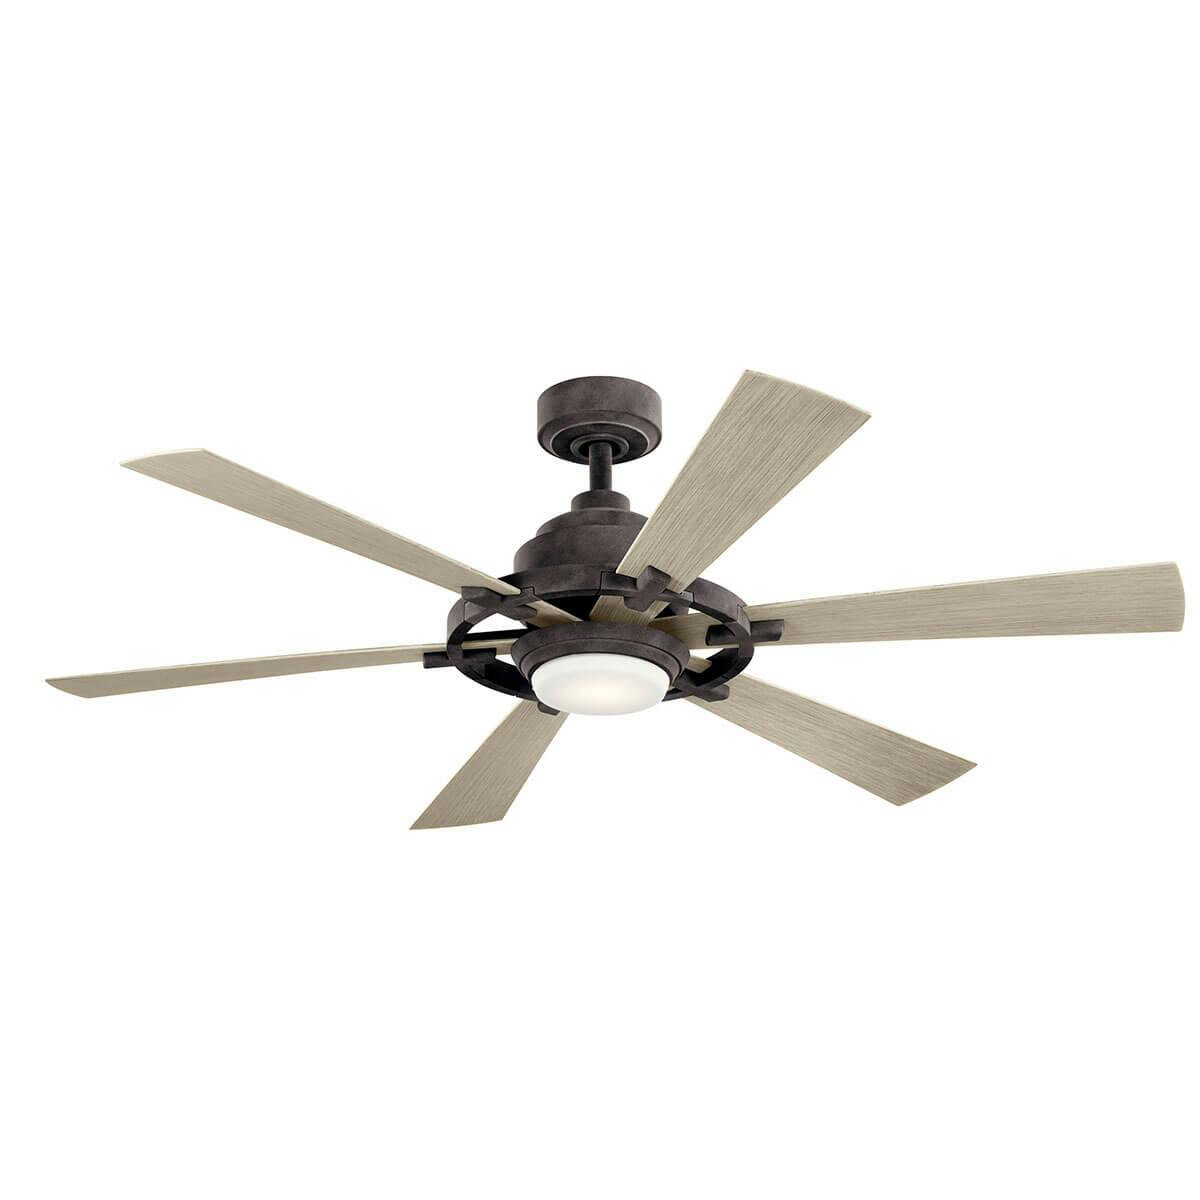 Gentry Lite 52" Ceiling Fan Weathered Zinc on a white background